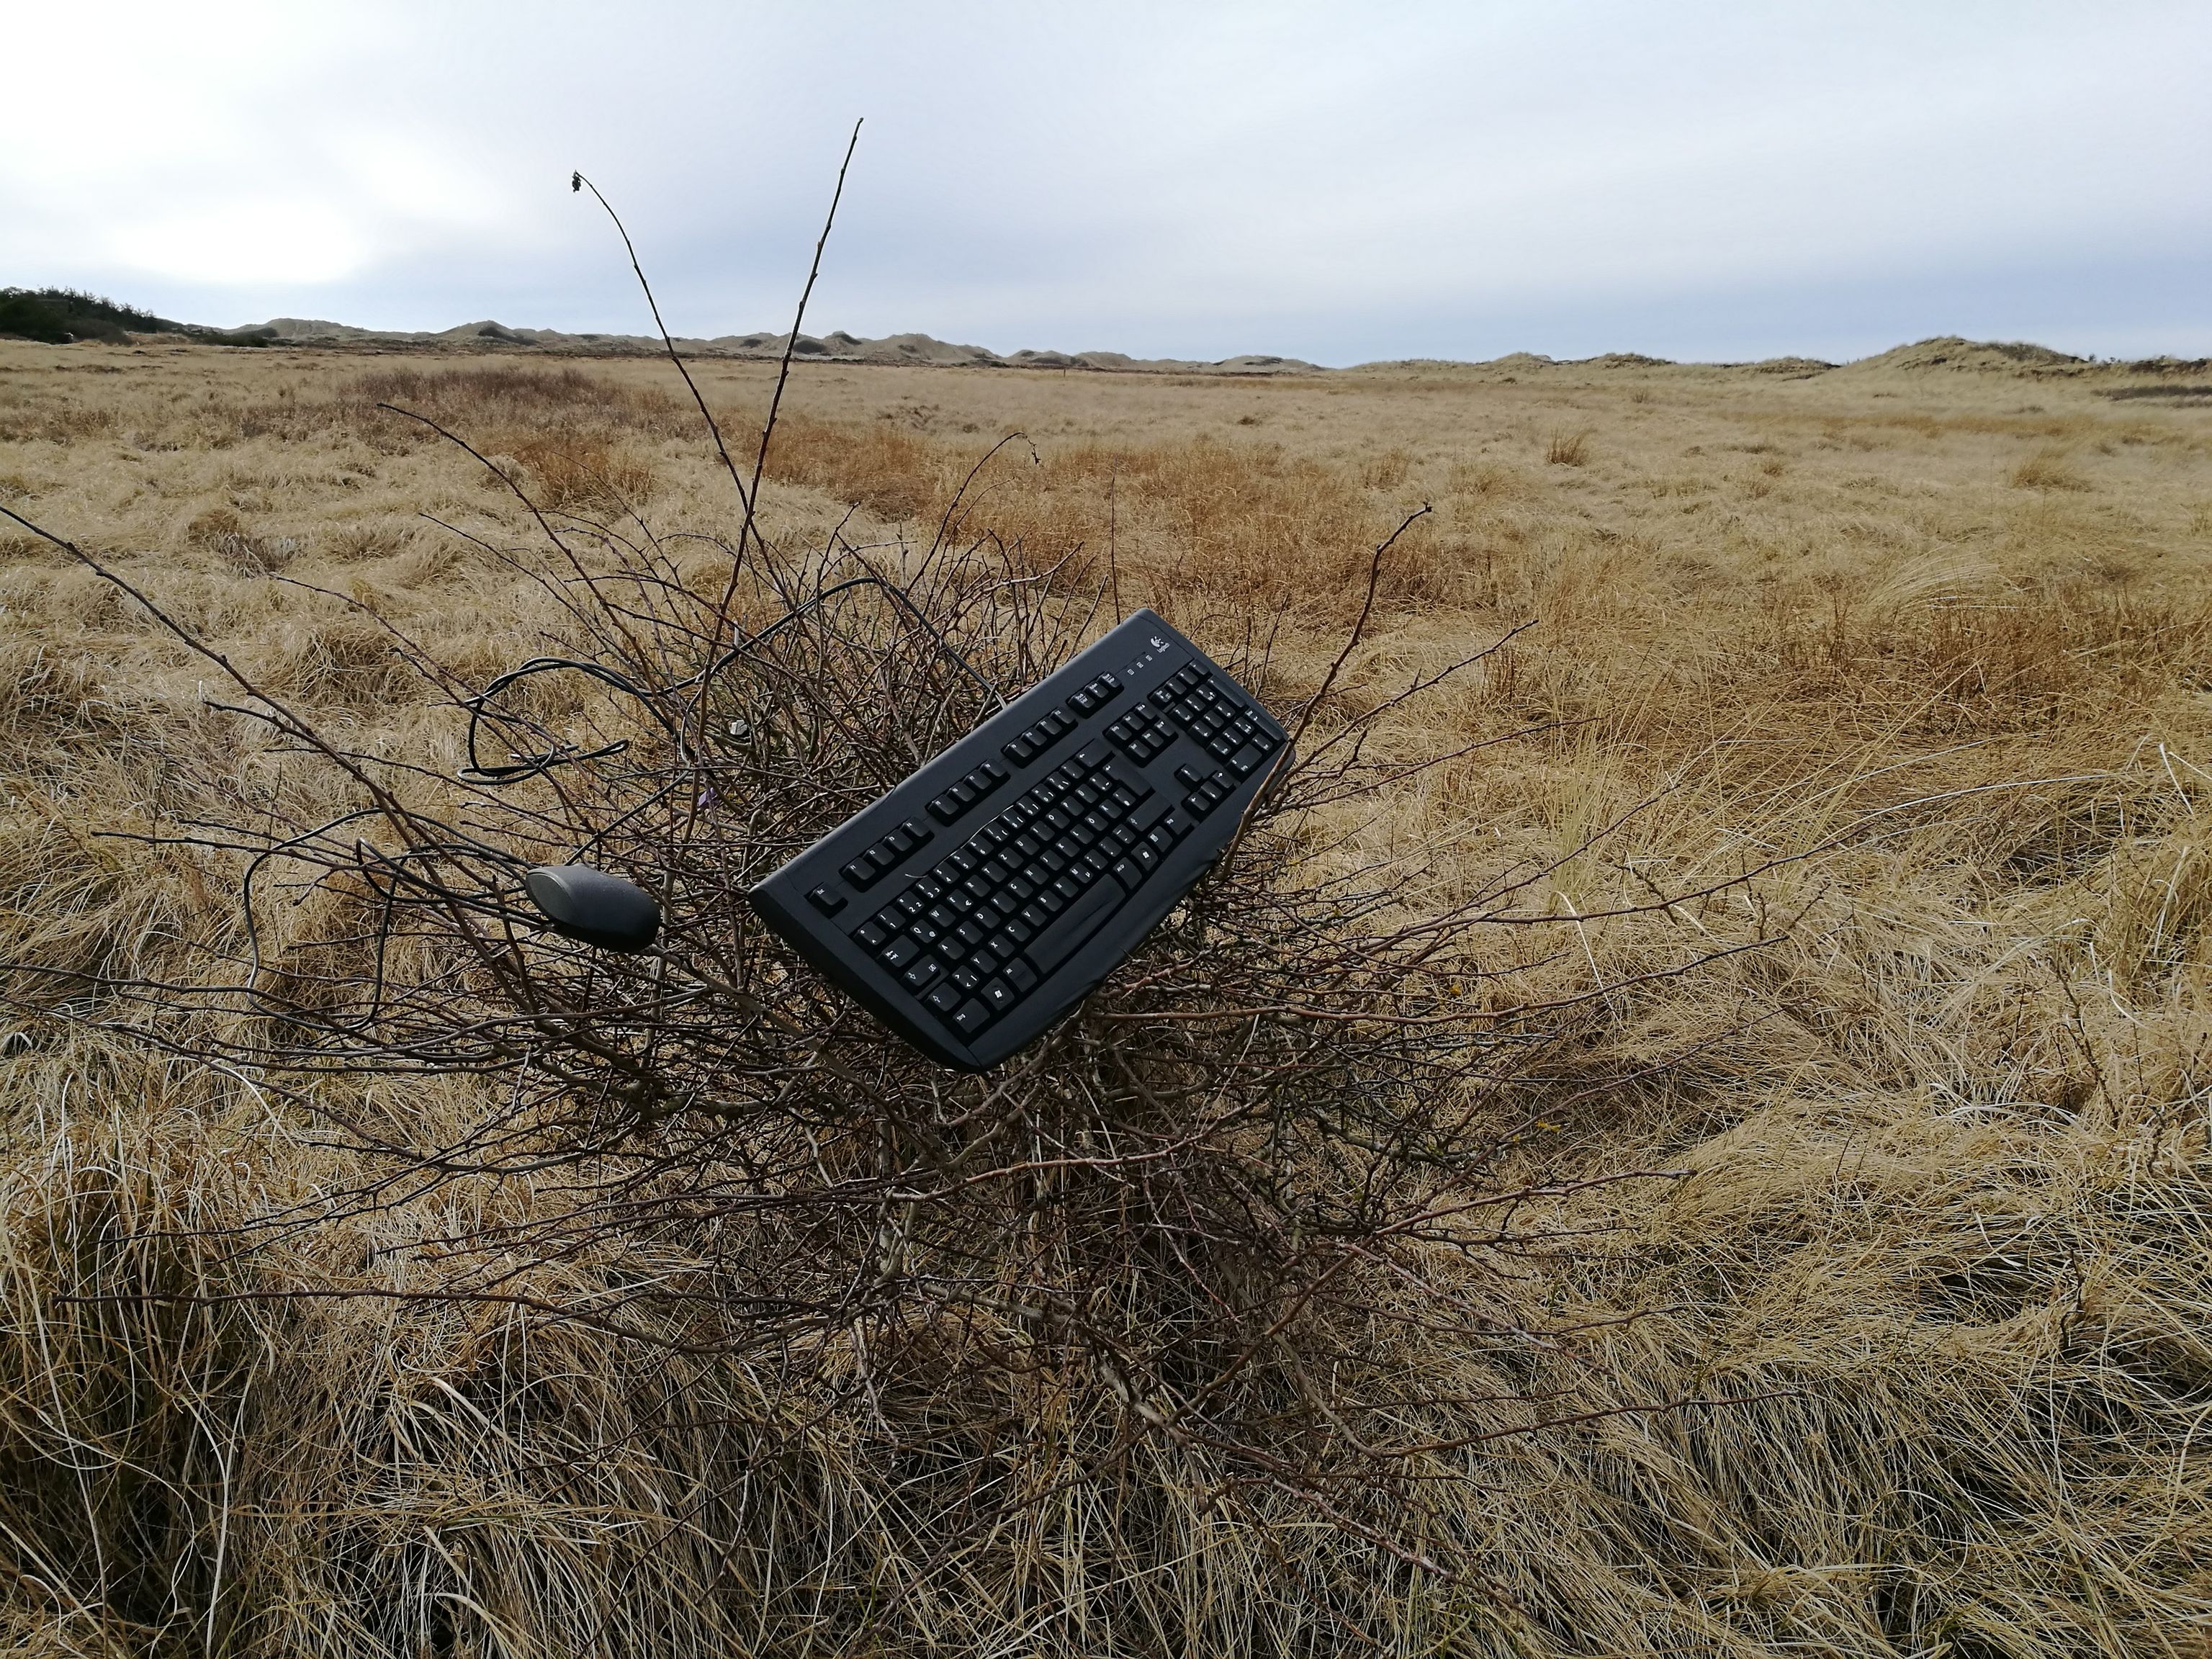 A keyboard and a mouse hanging in a scrub. There are dunes in the background.